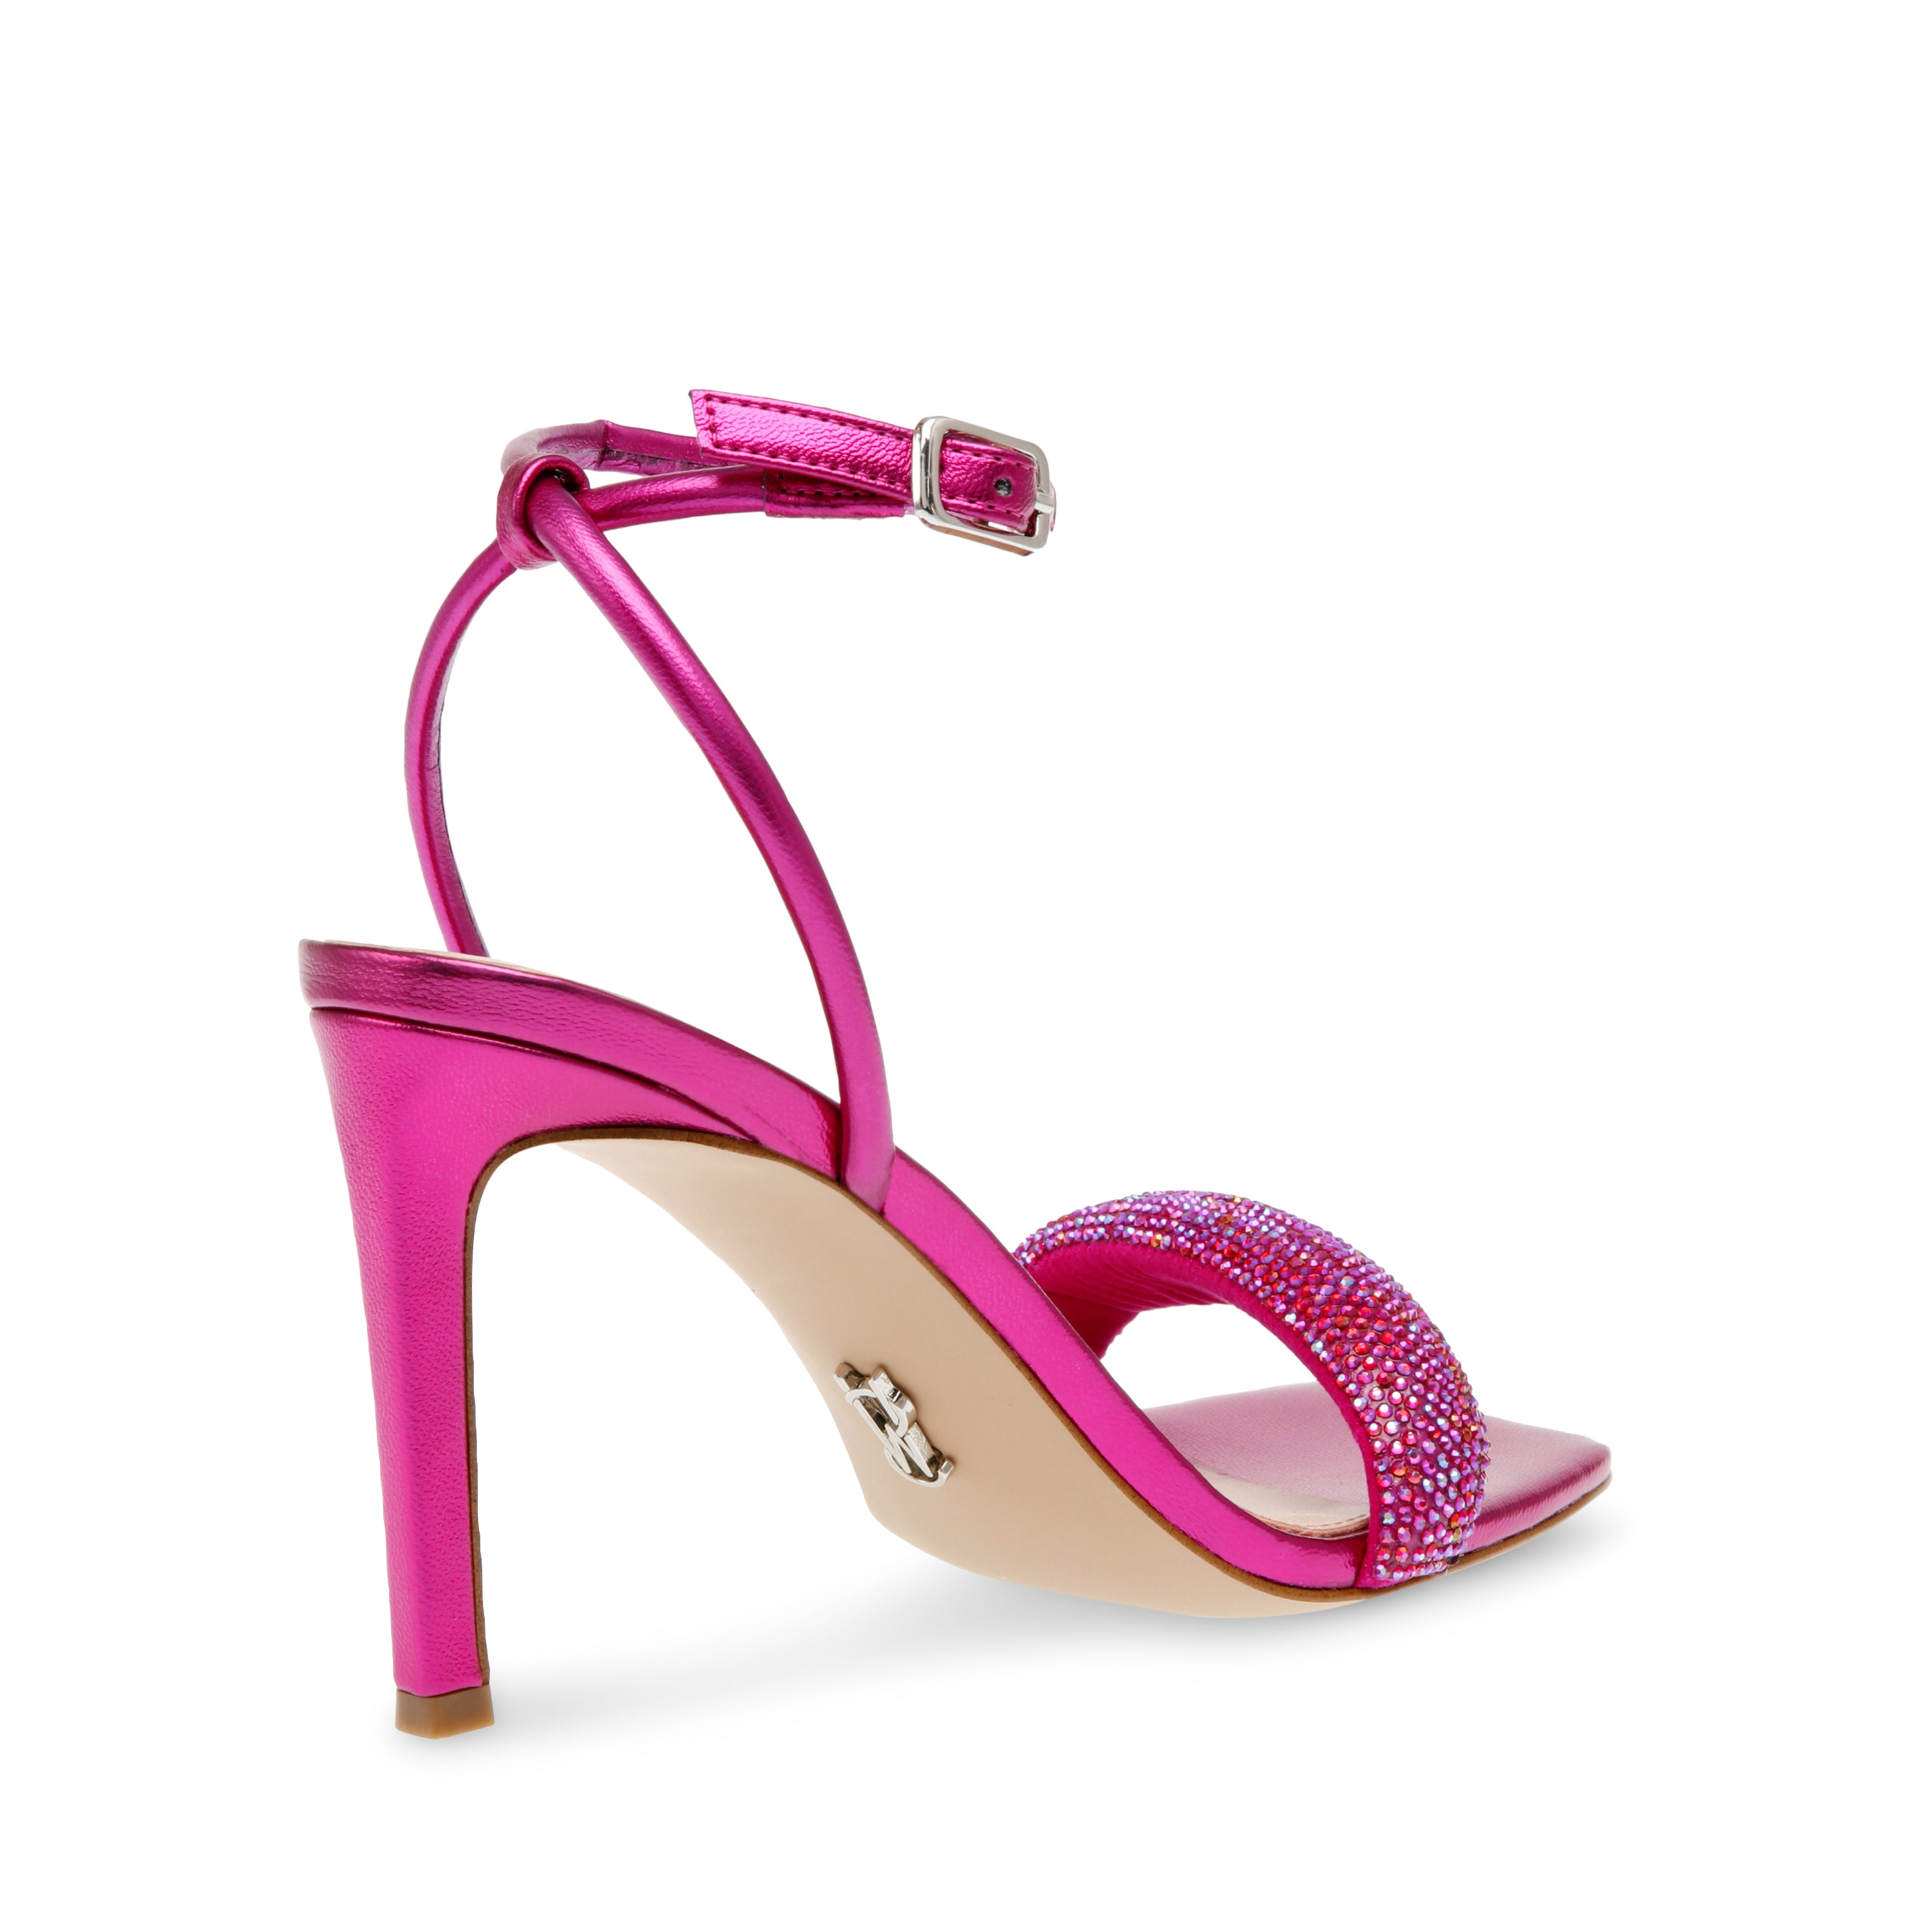 Entice-R Sandal Pink Iridescent- Hover Image